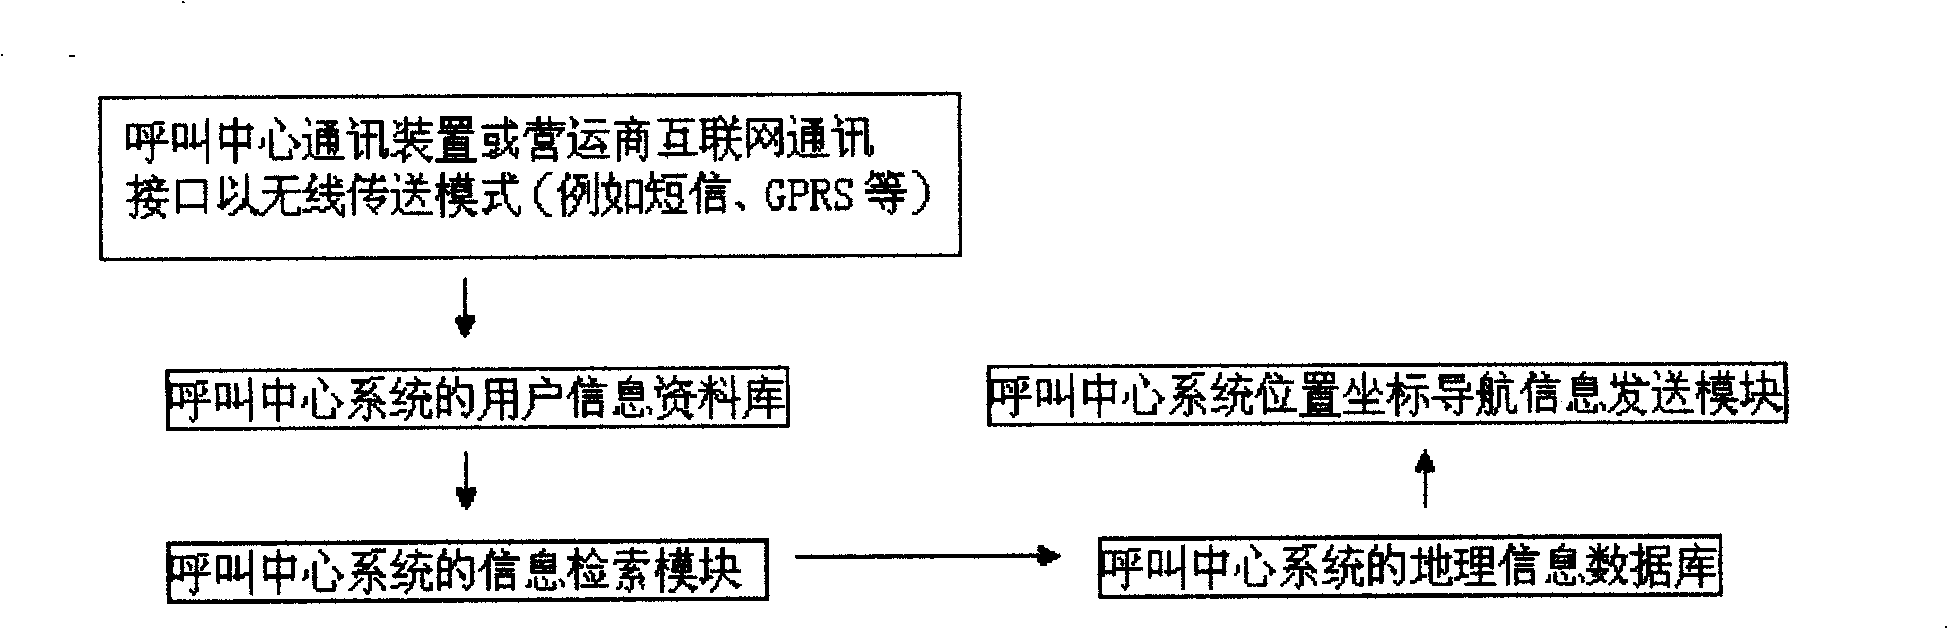 Related information navigation method and apparatus